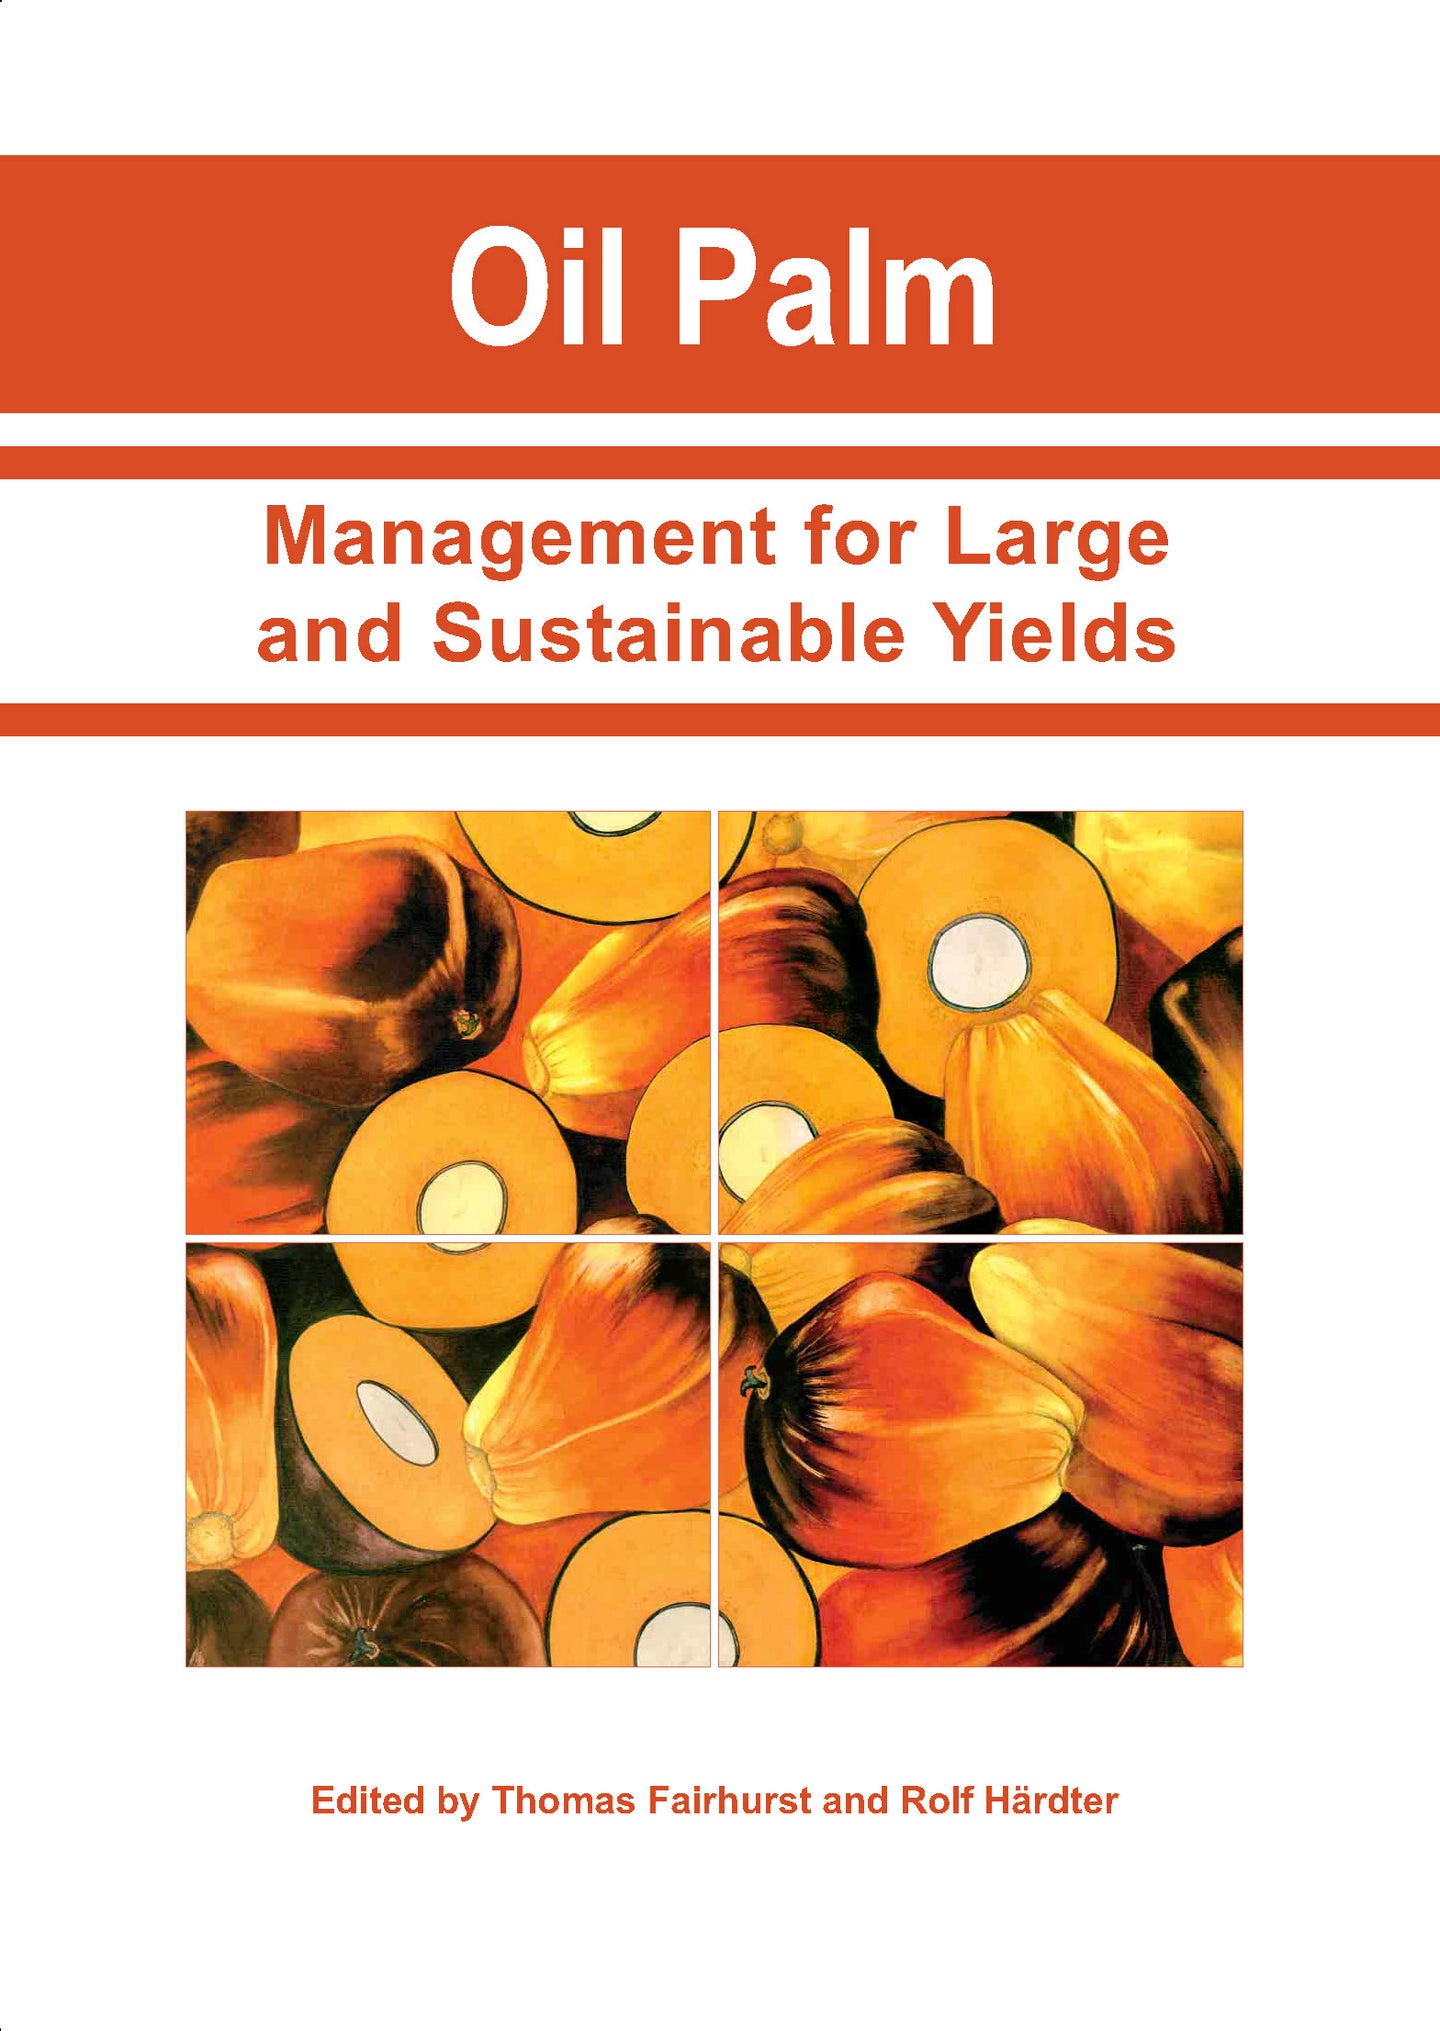 Oil Palm - Management for Large and Sustainable Yields (eBook)